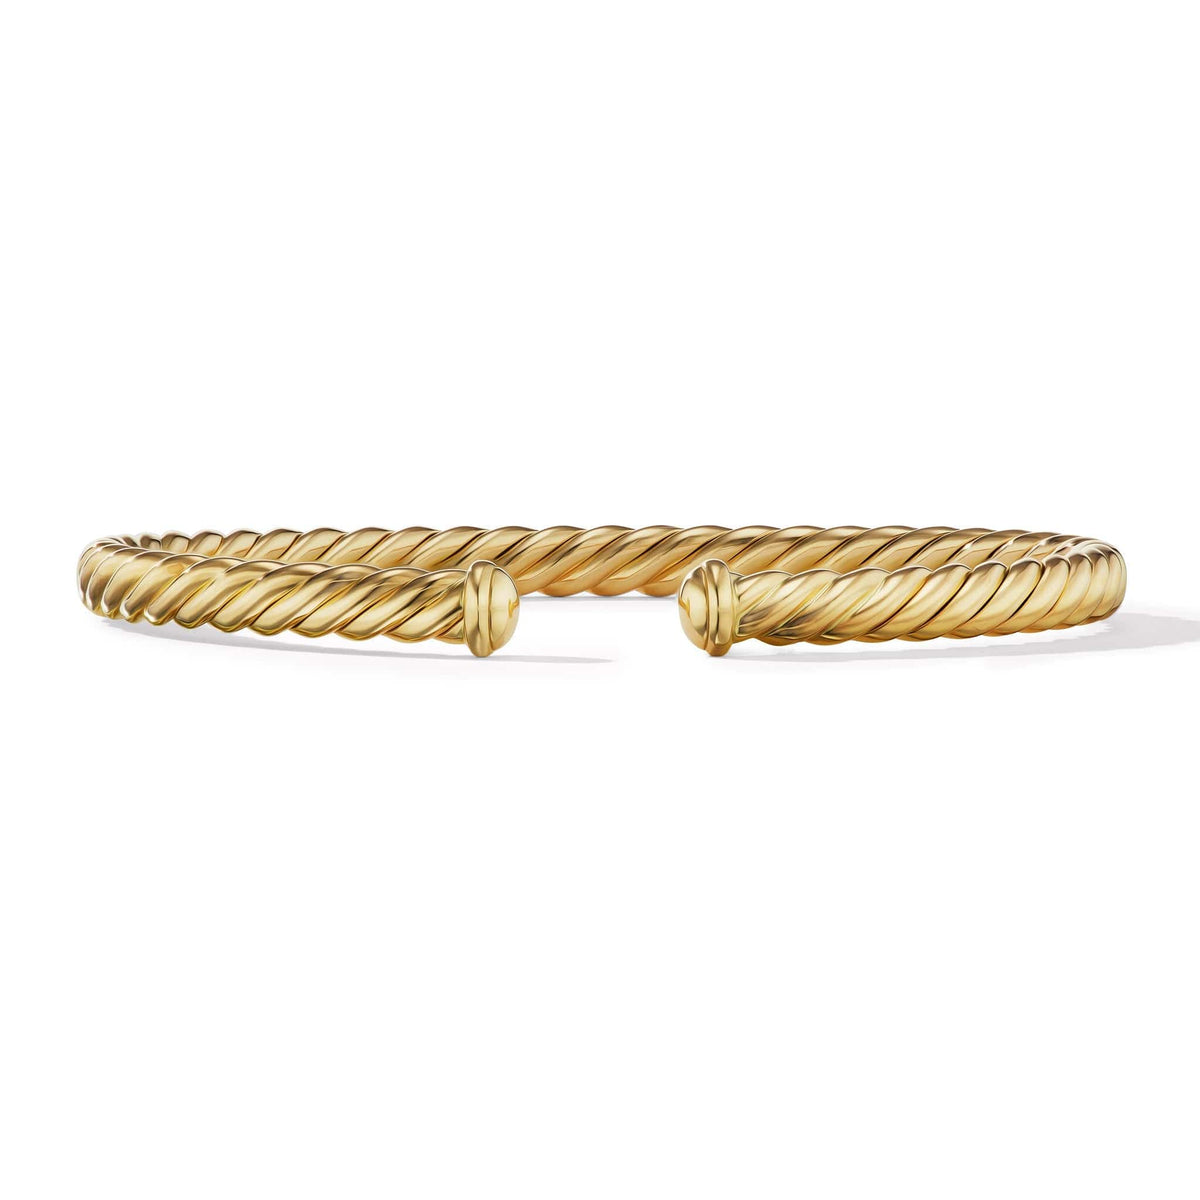 Cablespira® Oval Bracelet in 18K Yellow Gold, Long's Jewelers